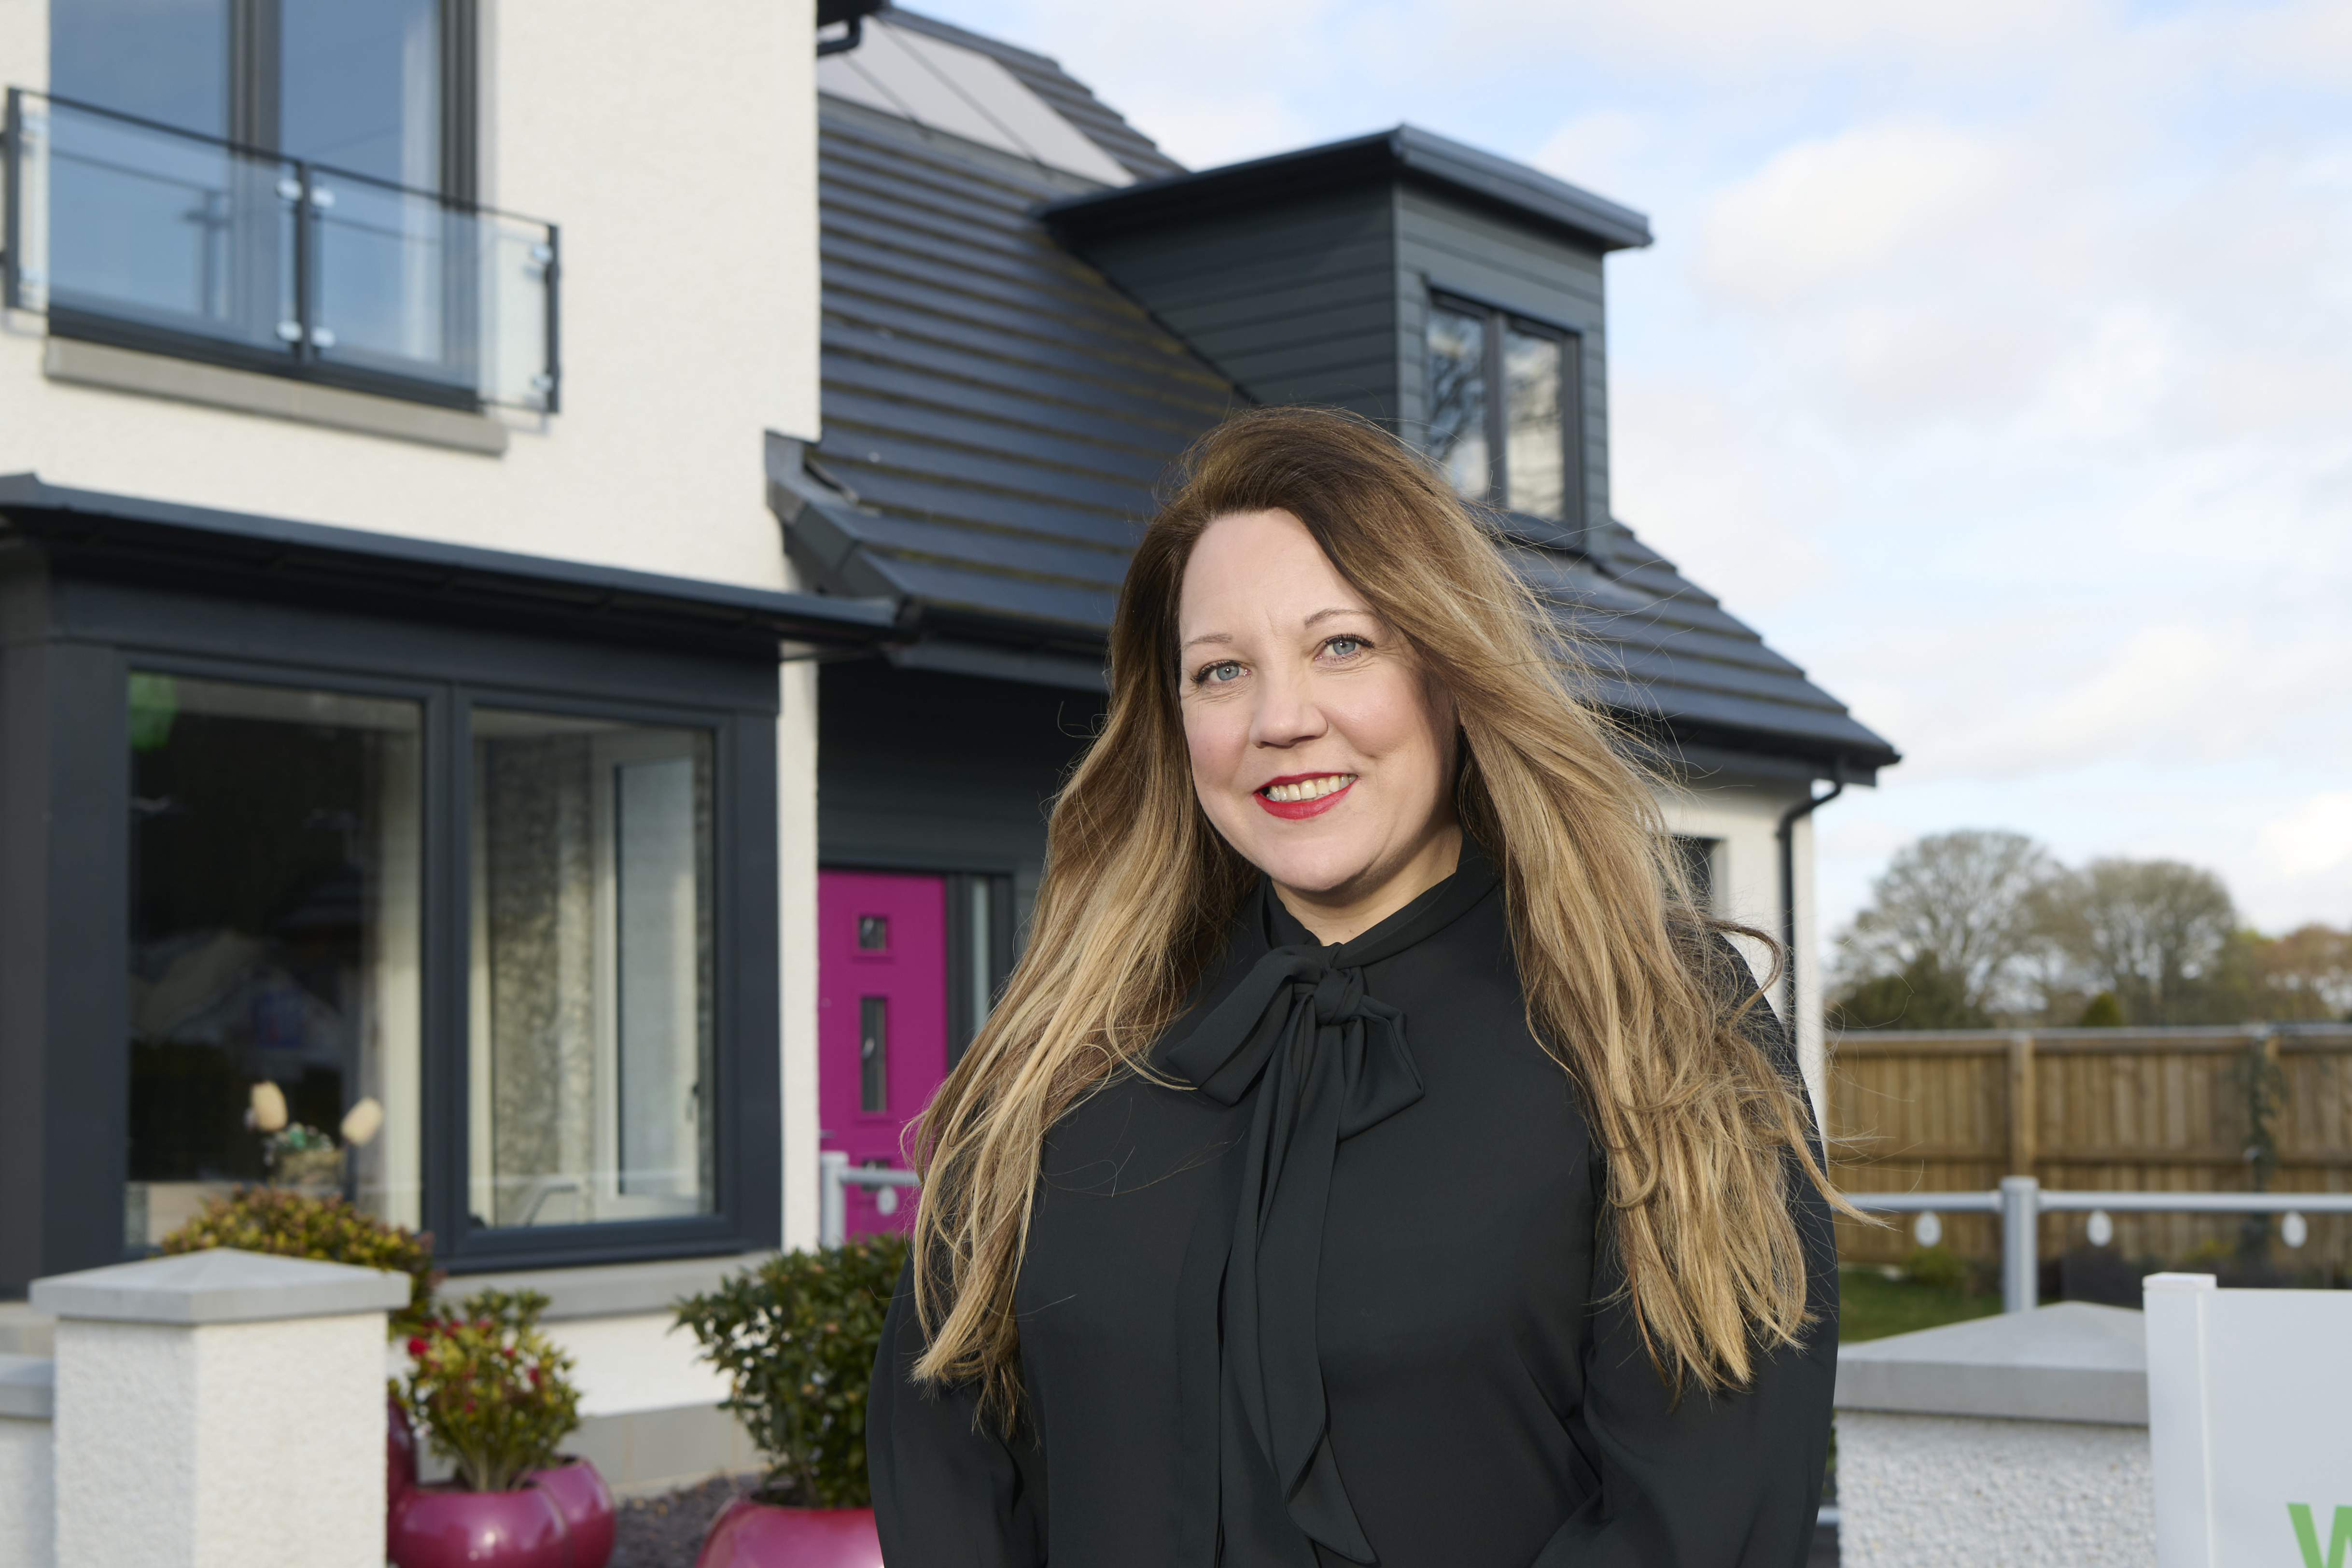 Tulloch Homes sees 12% rise in demand for homes in Highlands